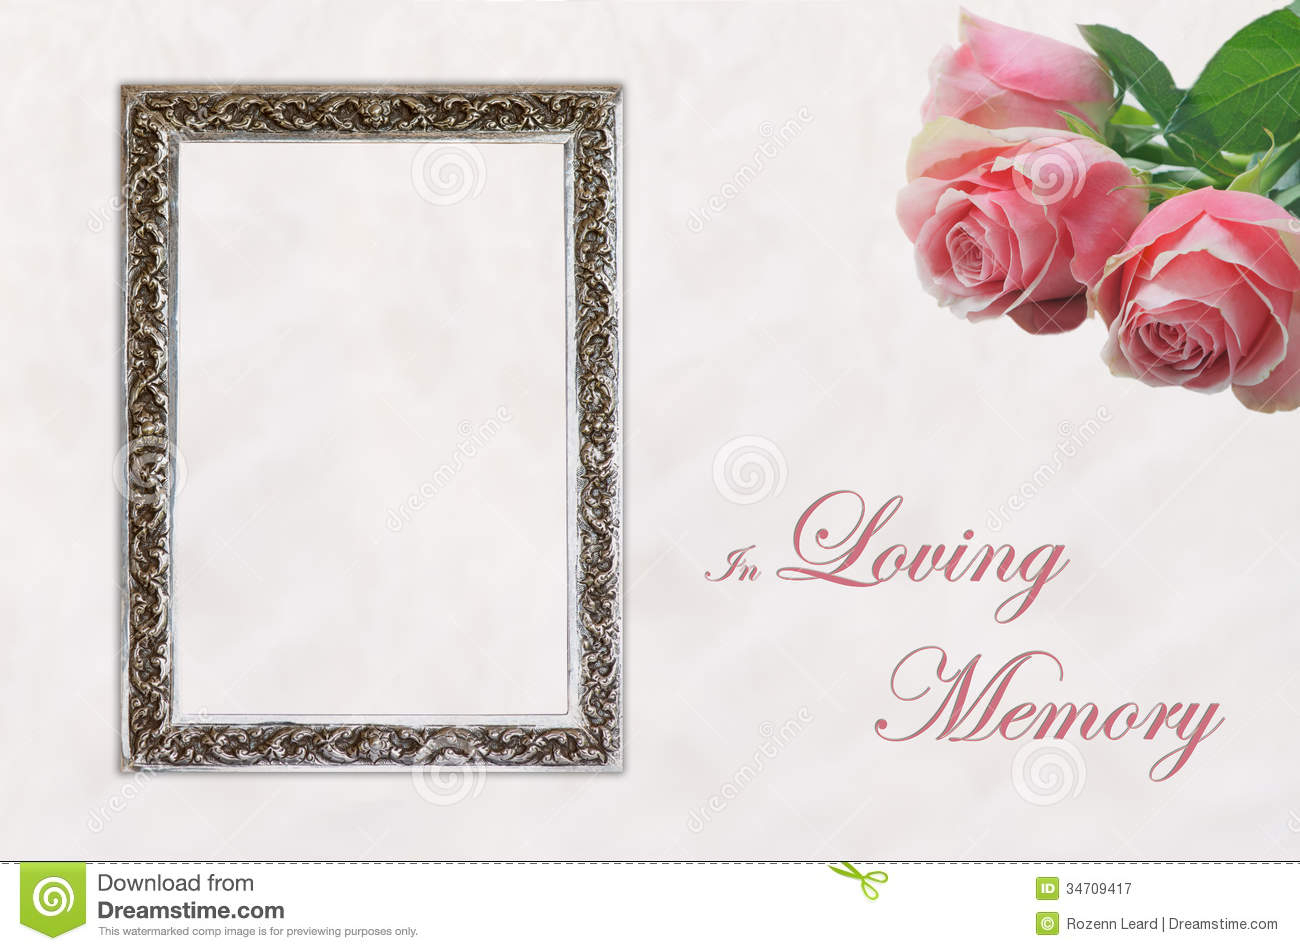 In Memory Cards Templates ] - Memory Template 4 Celebration Pertaining To In Memory Cards Templates